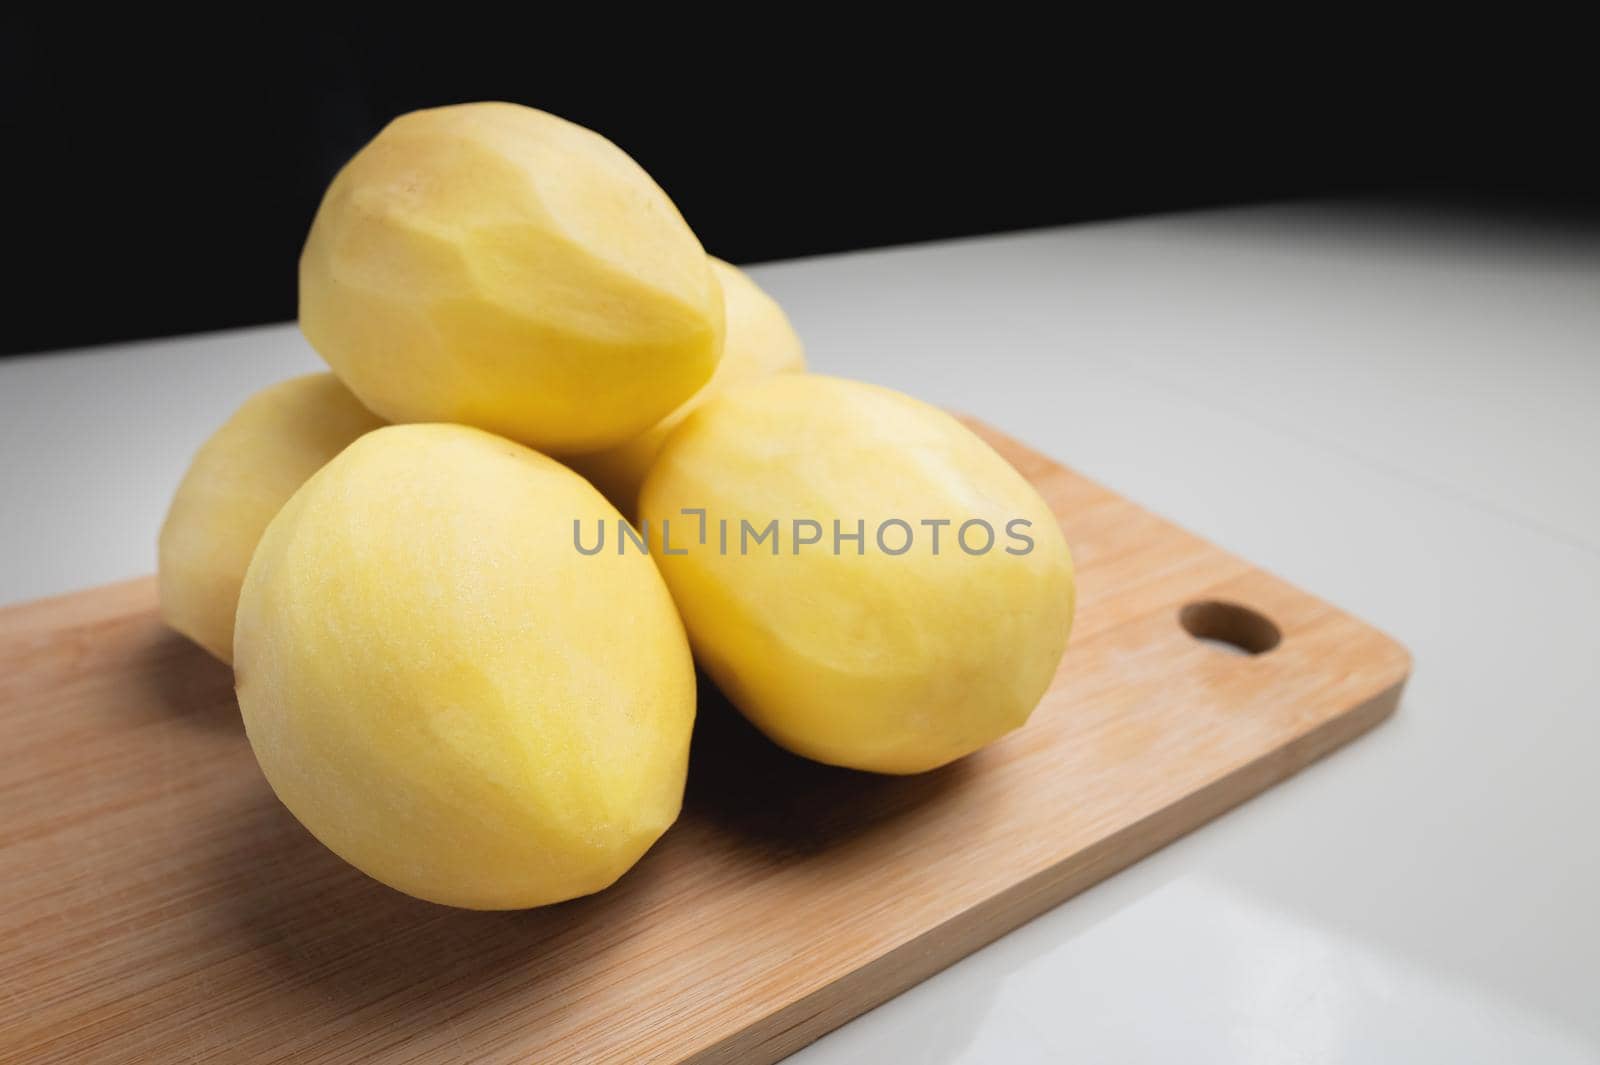 Some peeled potatoes on a wooden cutting board. On a white table against a dark background.